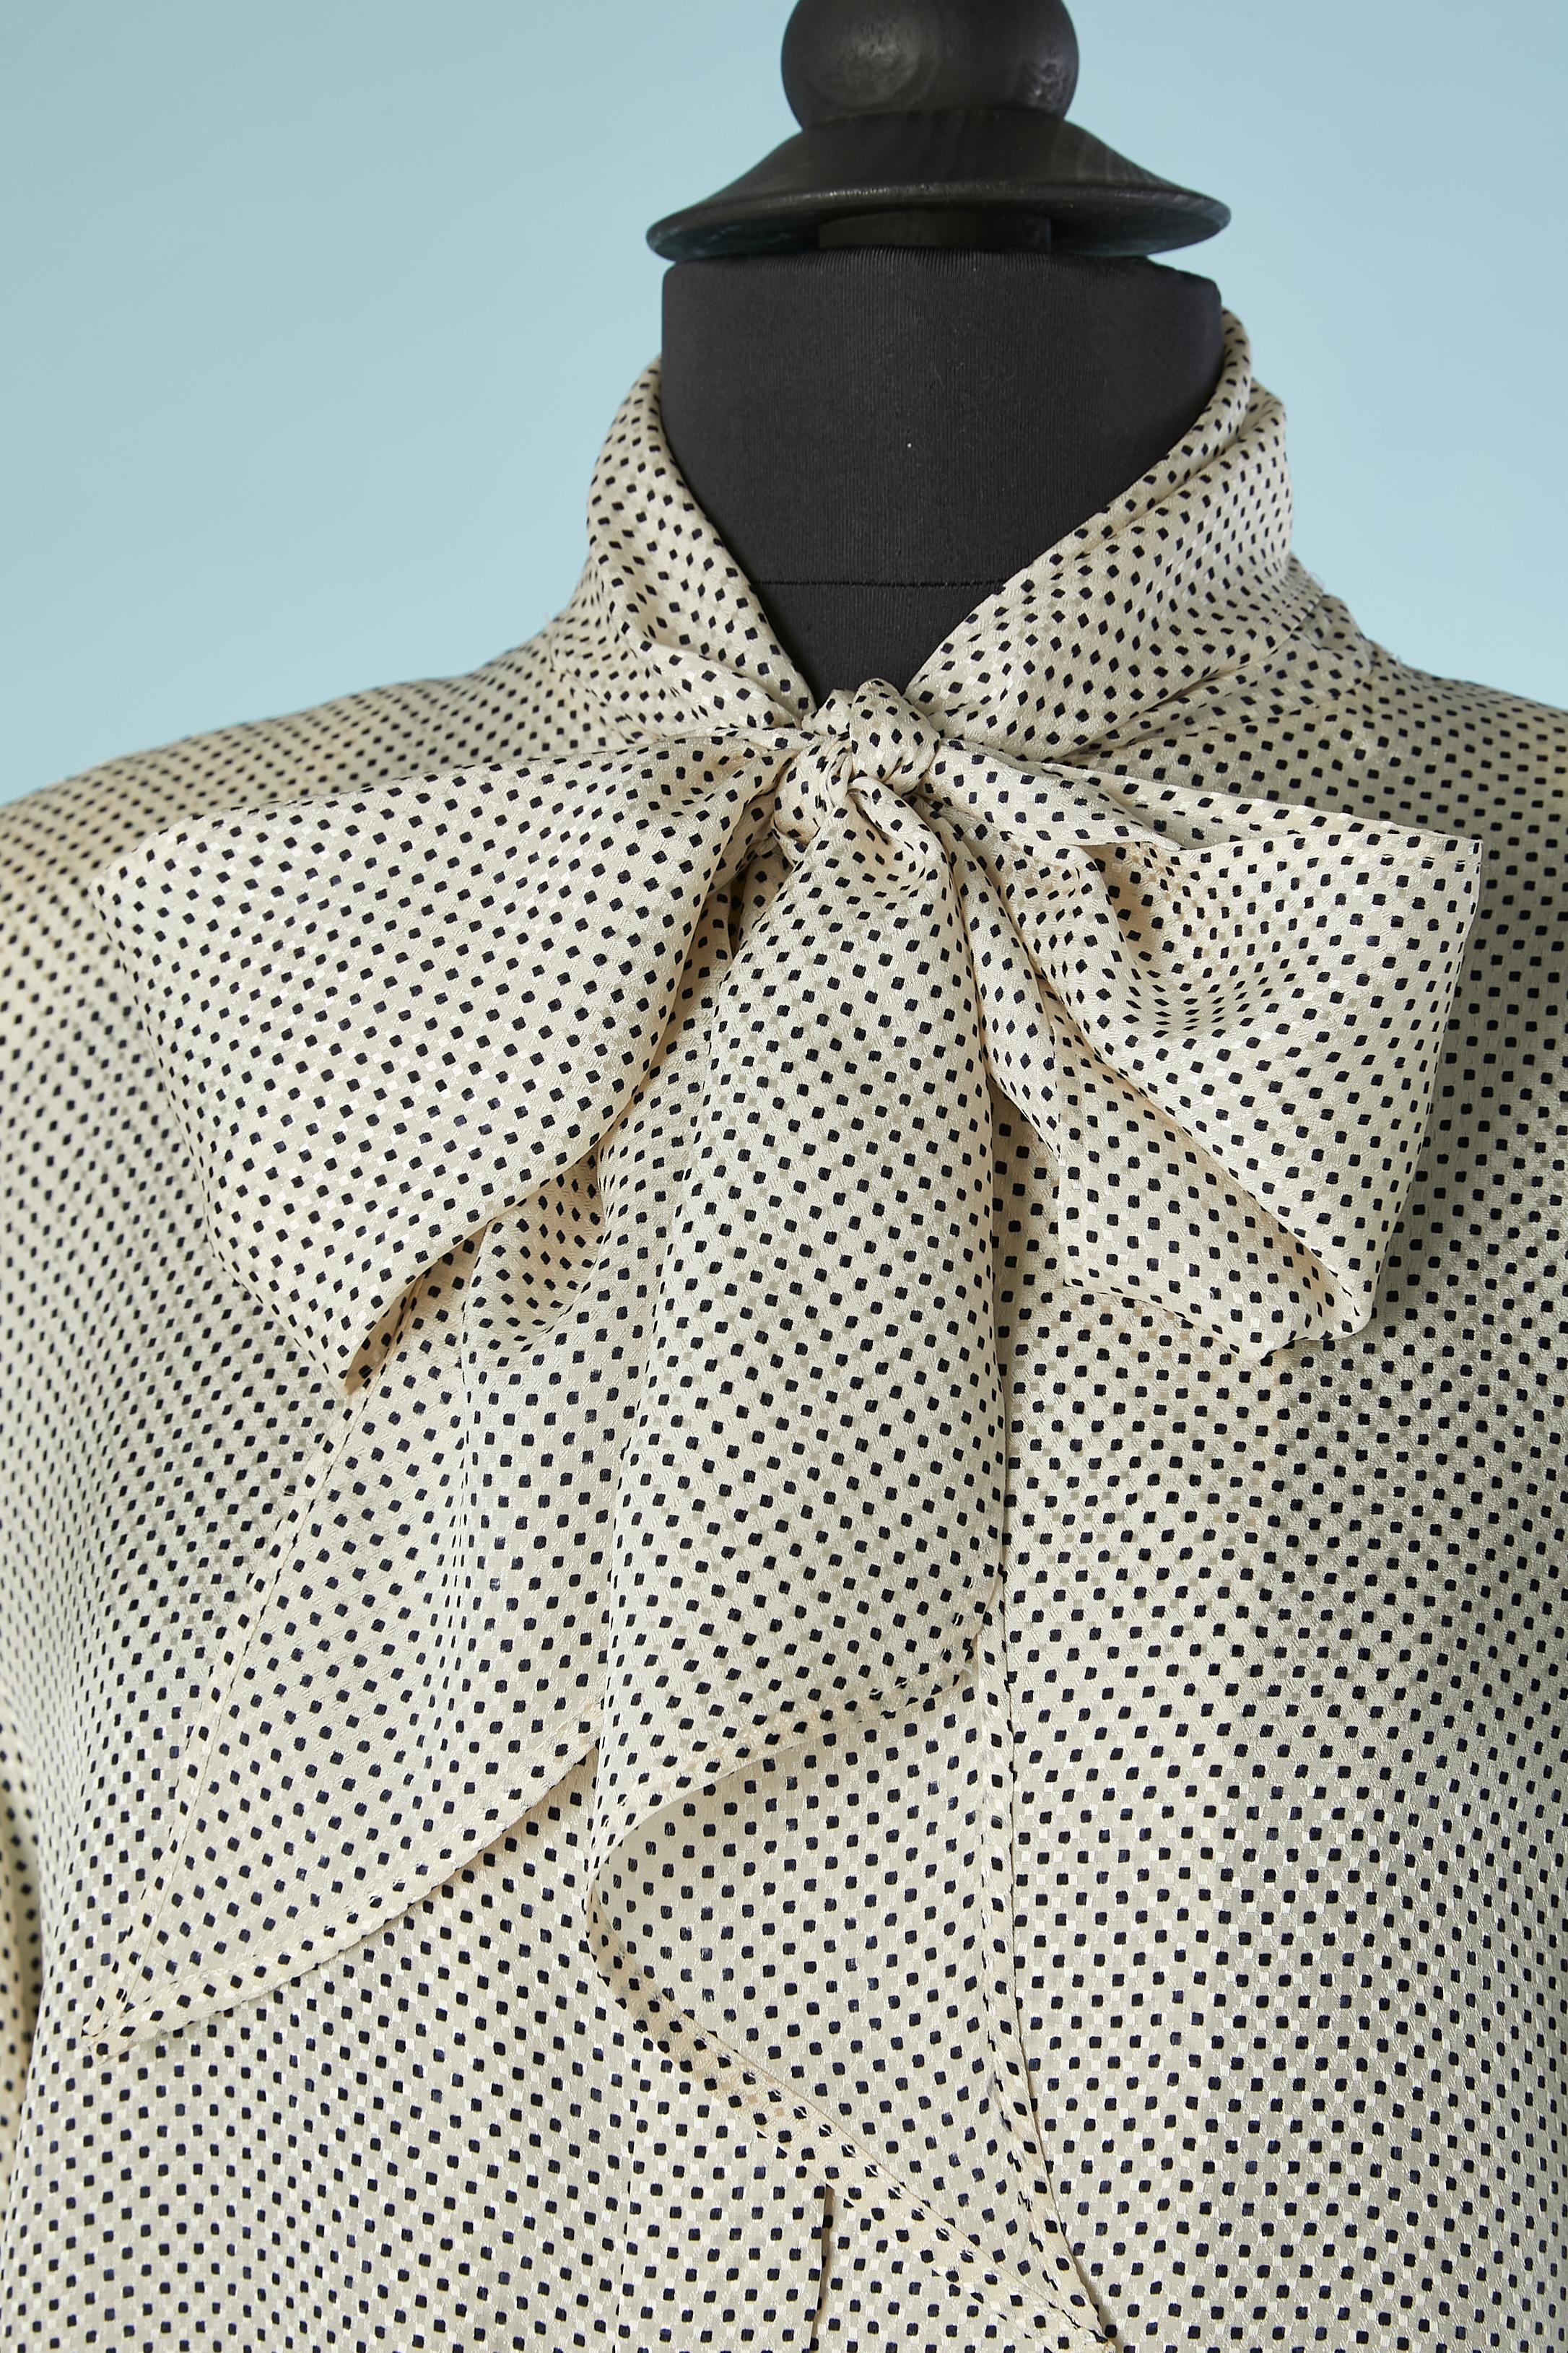 Black and white jacquard silk shirt with bow-tie collar. Shoulder-pads. Extra button provided. 
SIZE 44 (Fr) 14 (US) L 